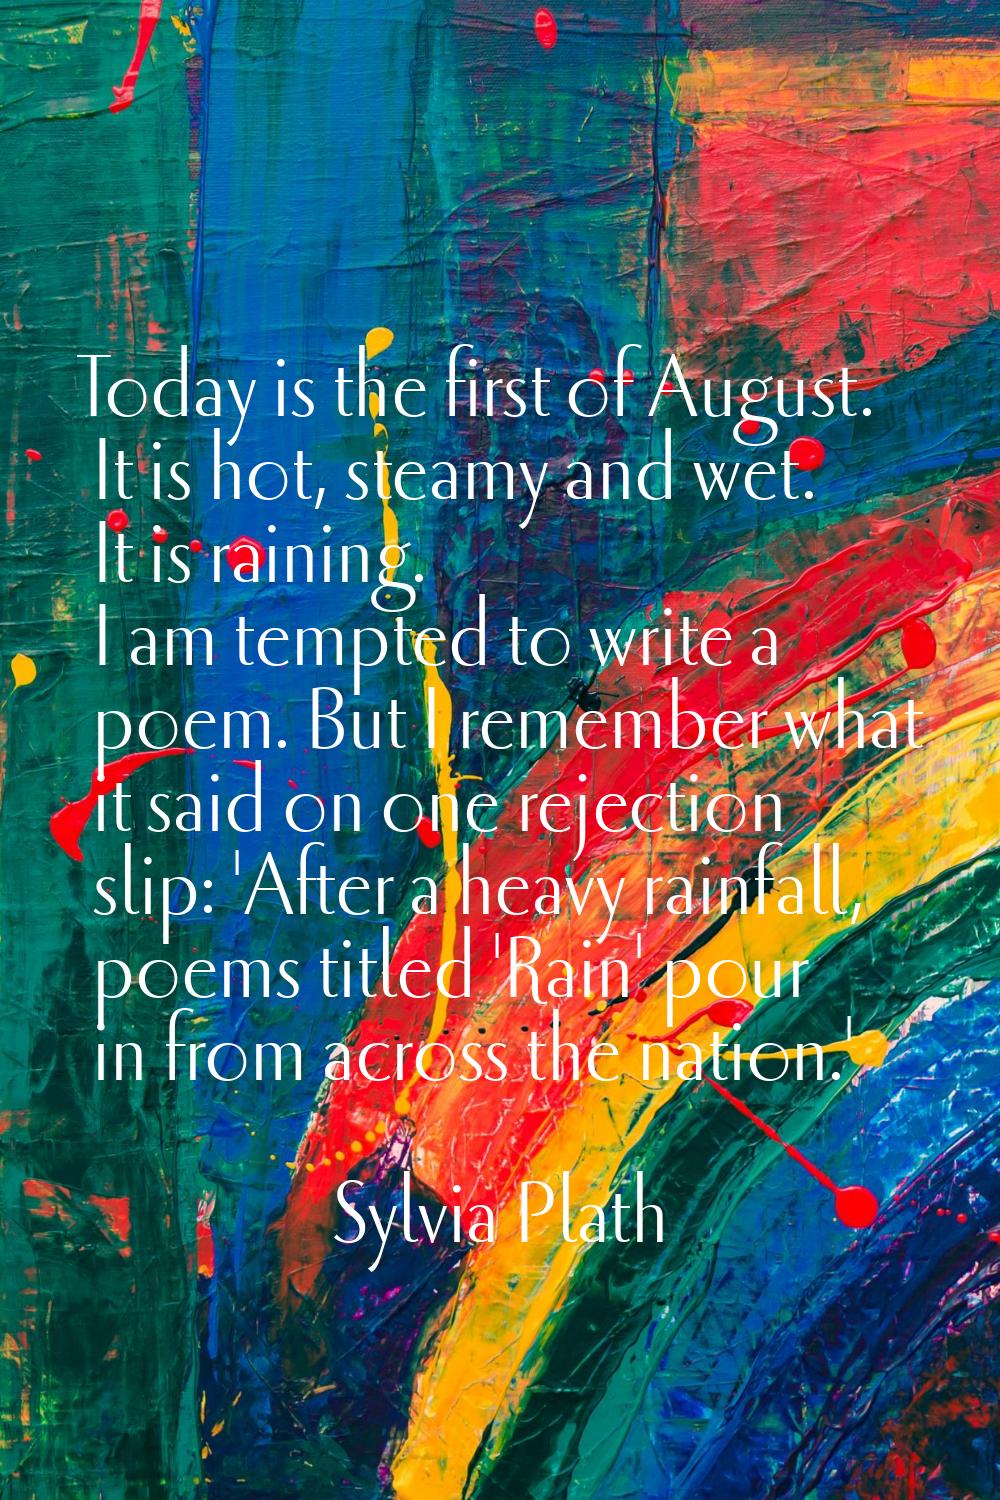 Today is the first of August. It is hot, steamy and wet. It is raining. I am tempted to write a poe